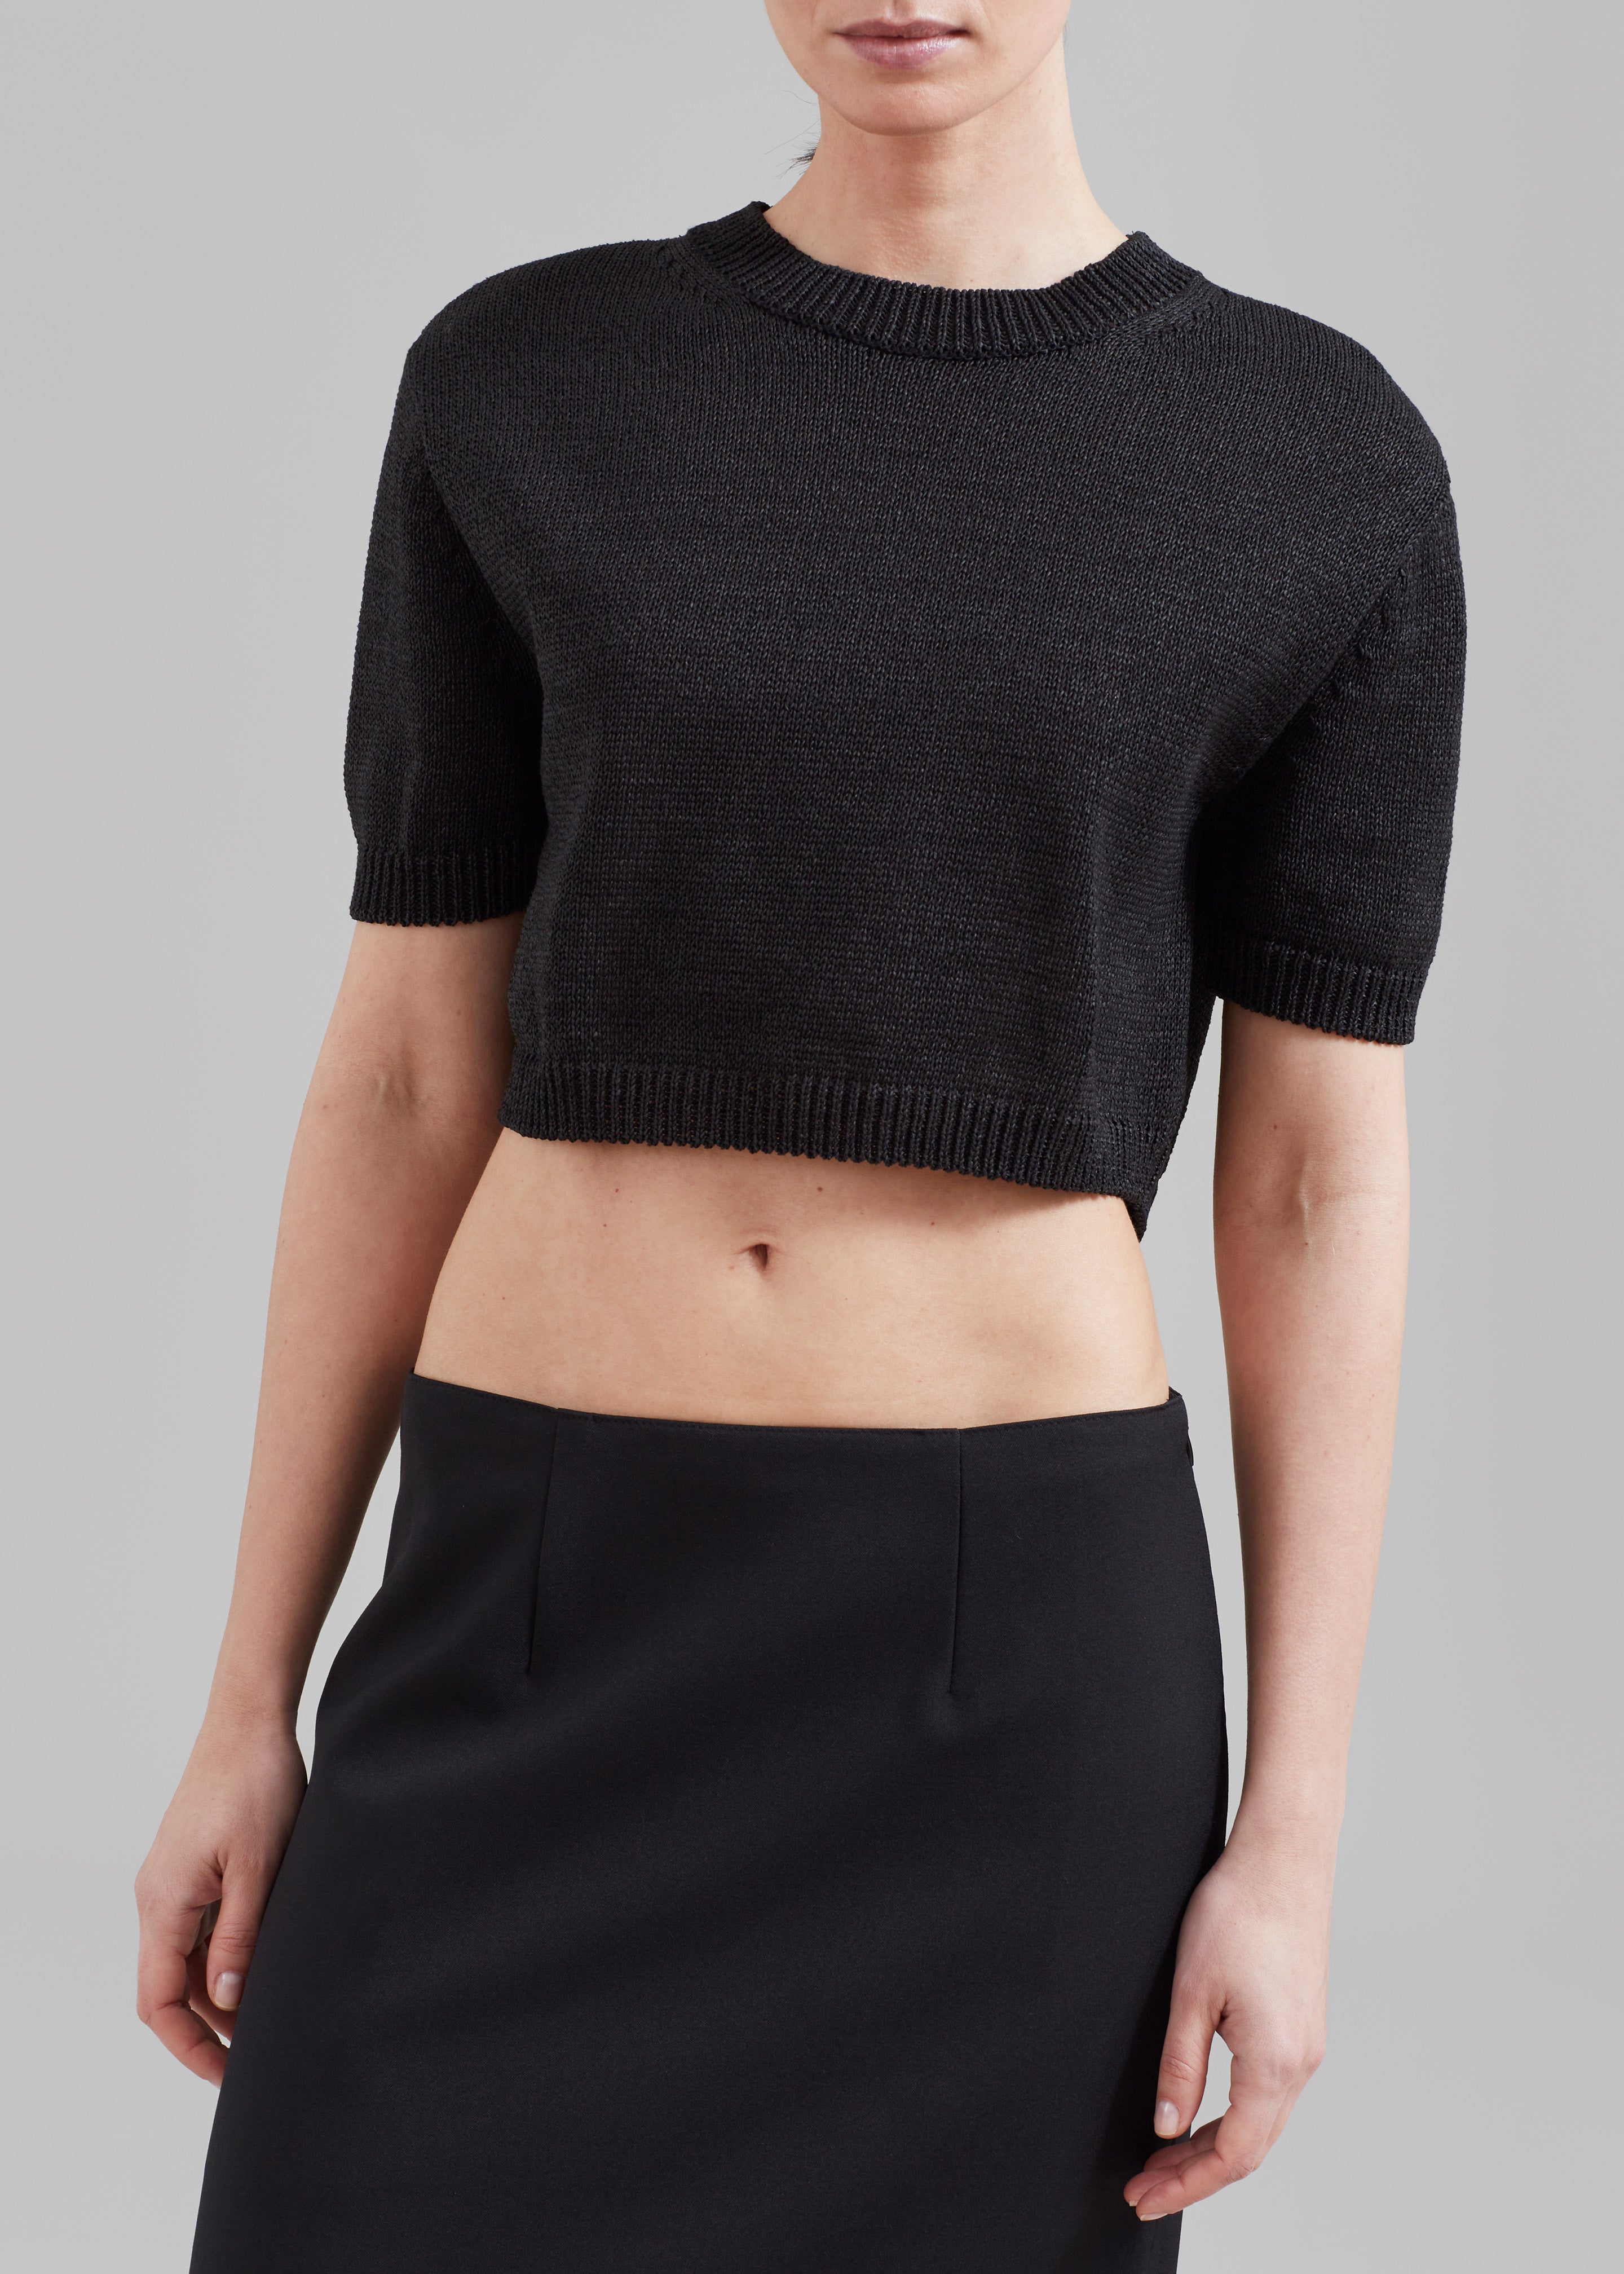 Holly Cropped Knit Top - Black - 6